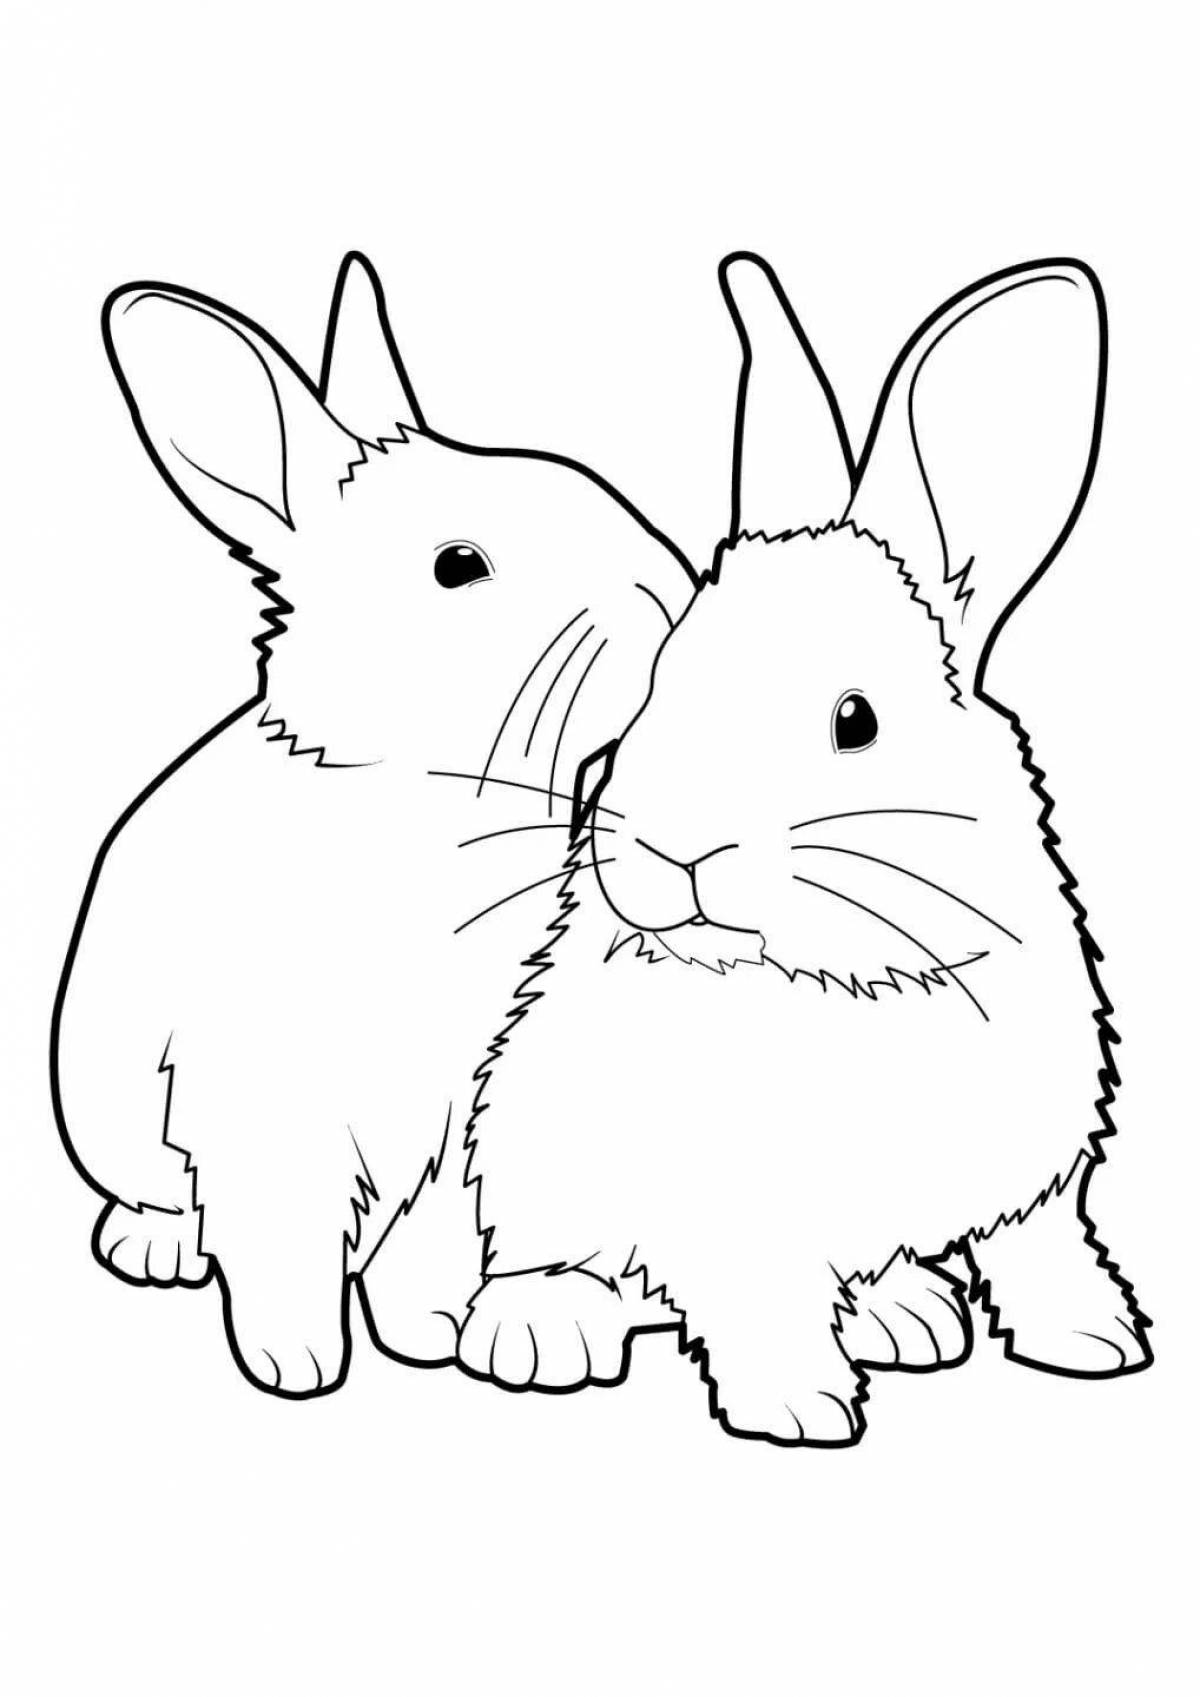 Coloring cute rabbit and cat